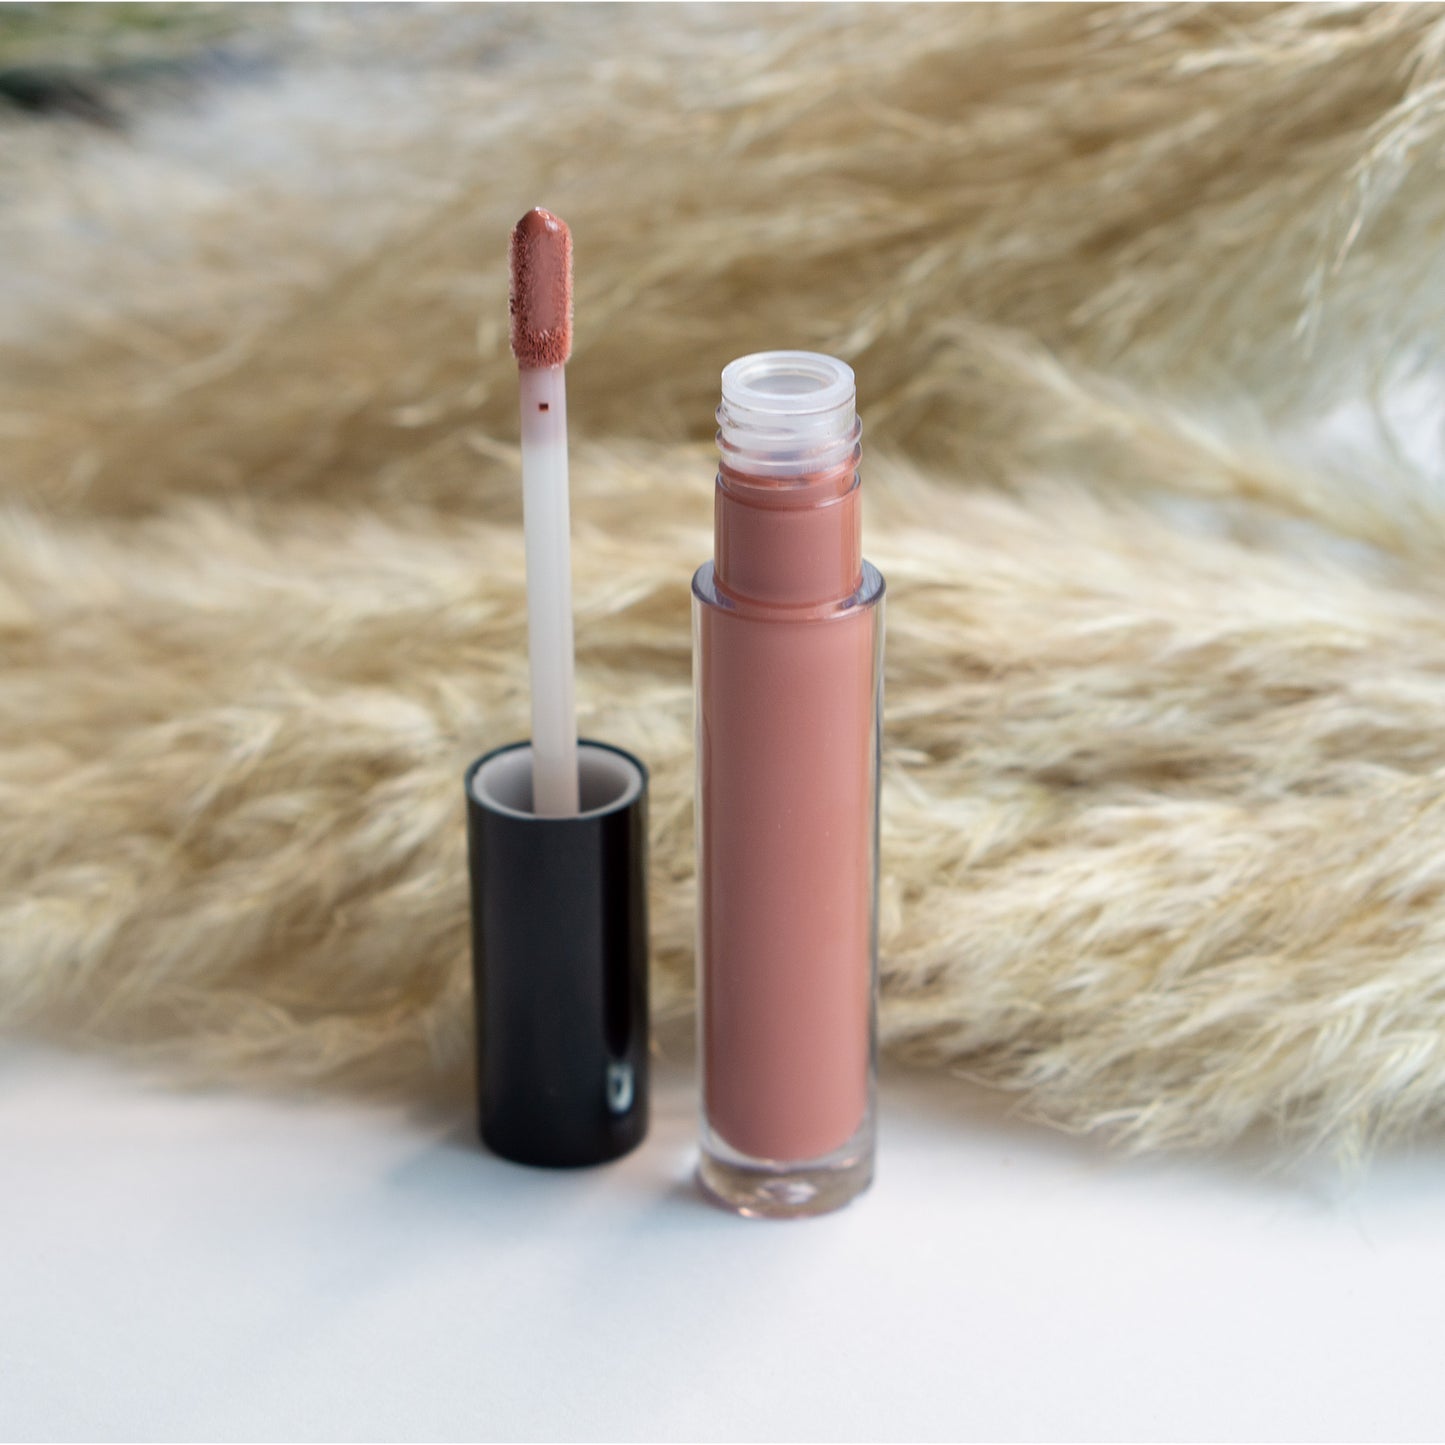 Discover the nourishing benefits of Cruisin Organics Brick Lip Gloss in Warm Red. With its all-natural ingredients, this lip gloss provides a beautiful warm red hue while keeping your lips moisturized and healthy. Say goodbye to dry, chapped lips and hello to a natural, radiant look.